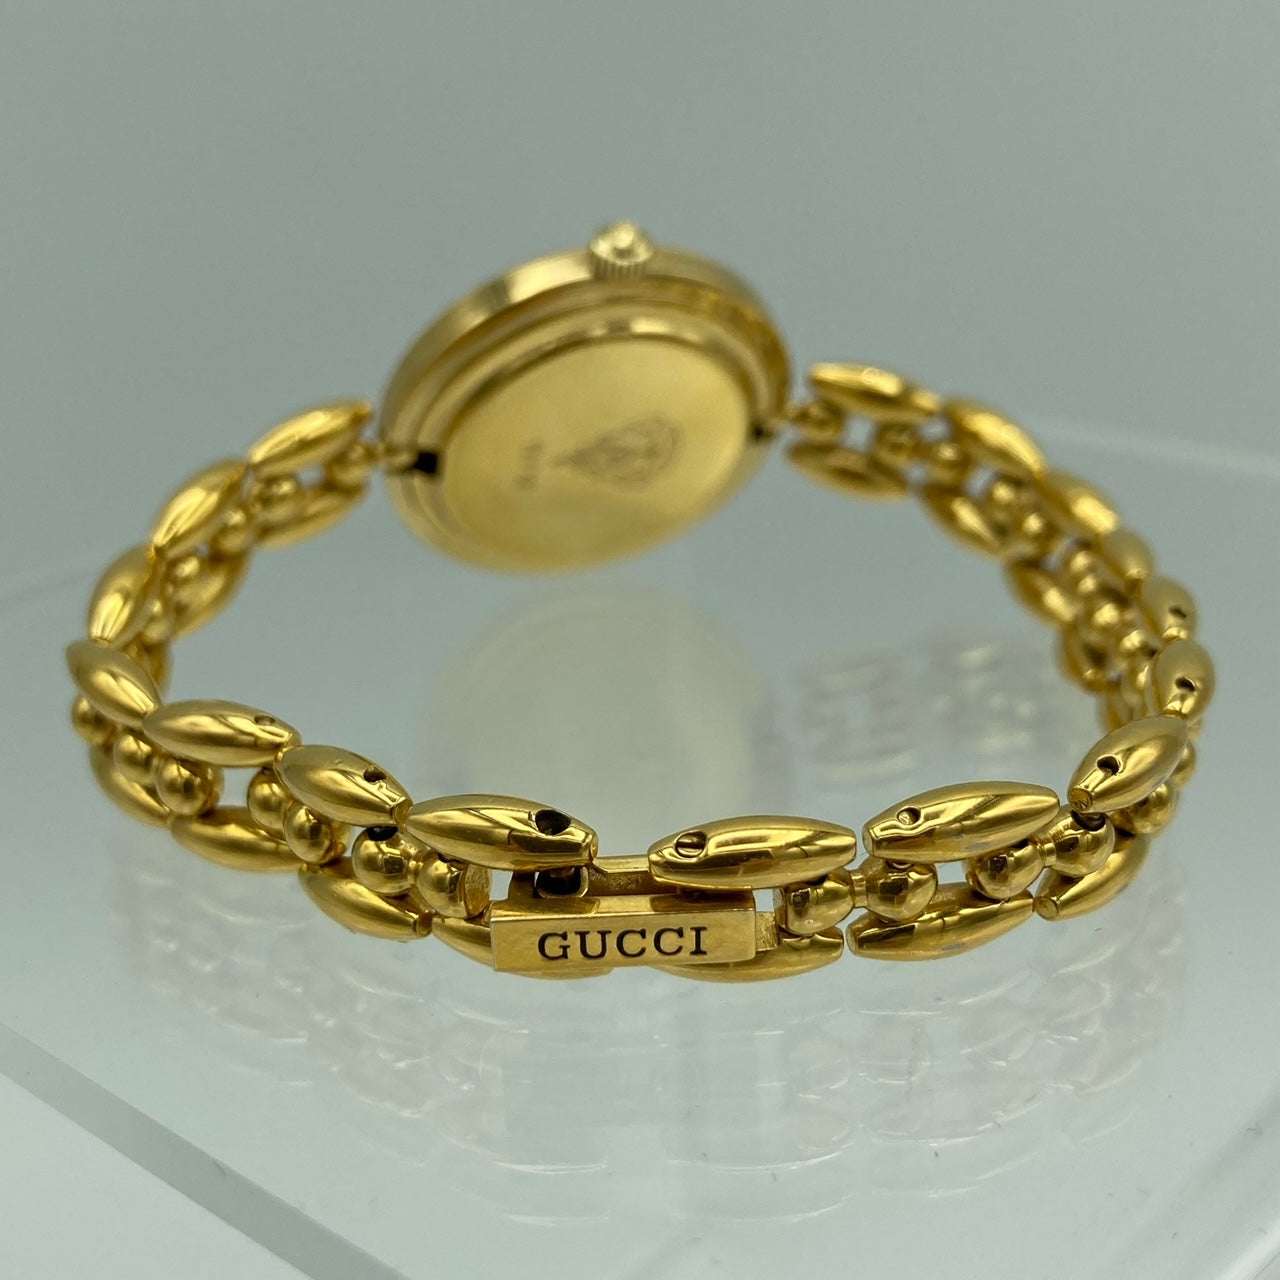 Vintage Gucci Gold Plated Quartz Watch with Interchangeable Bezels 11/12